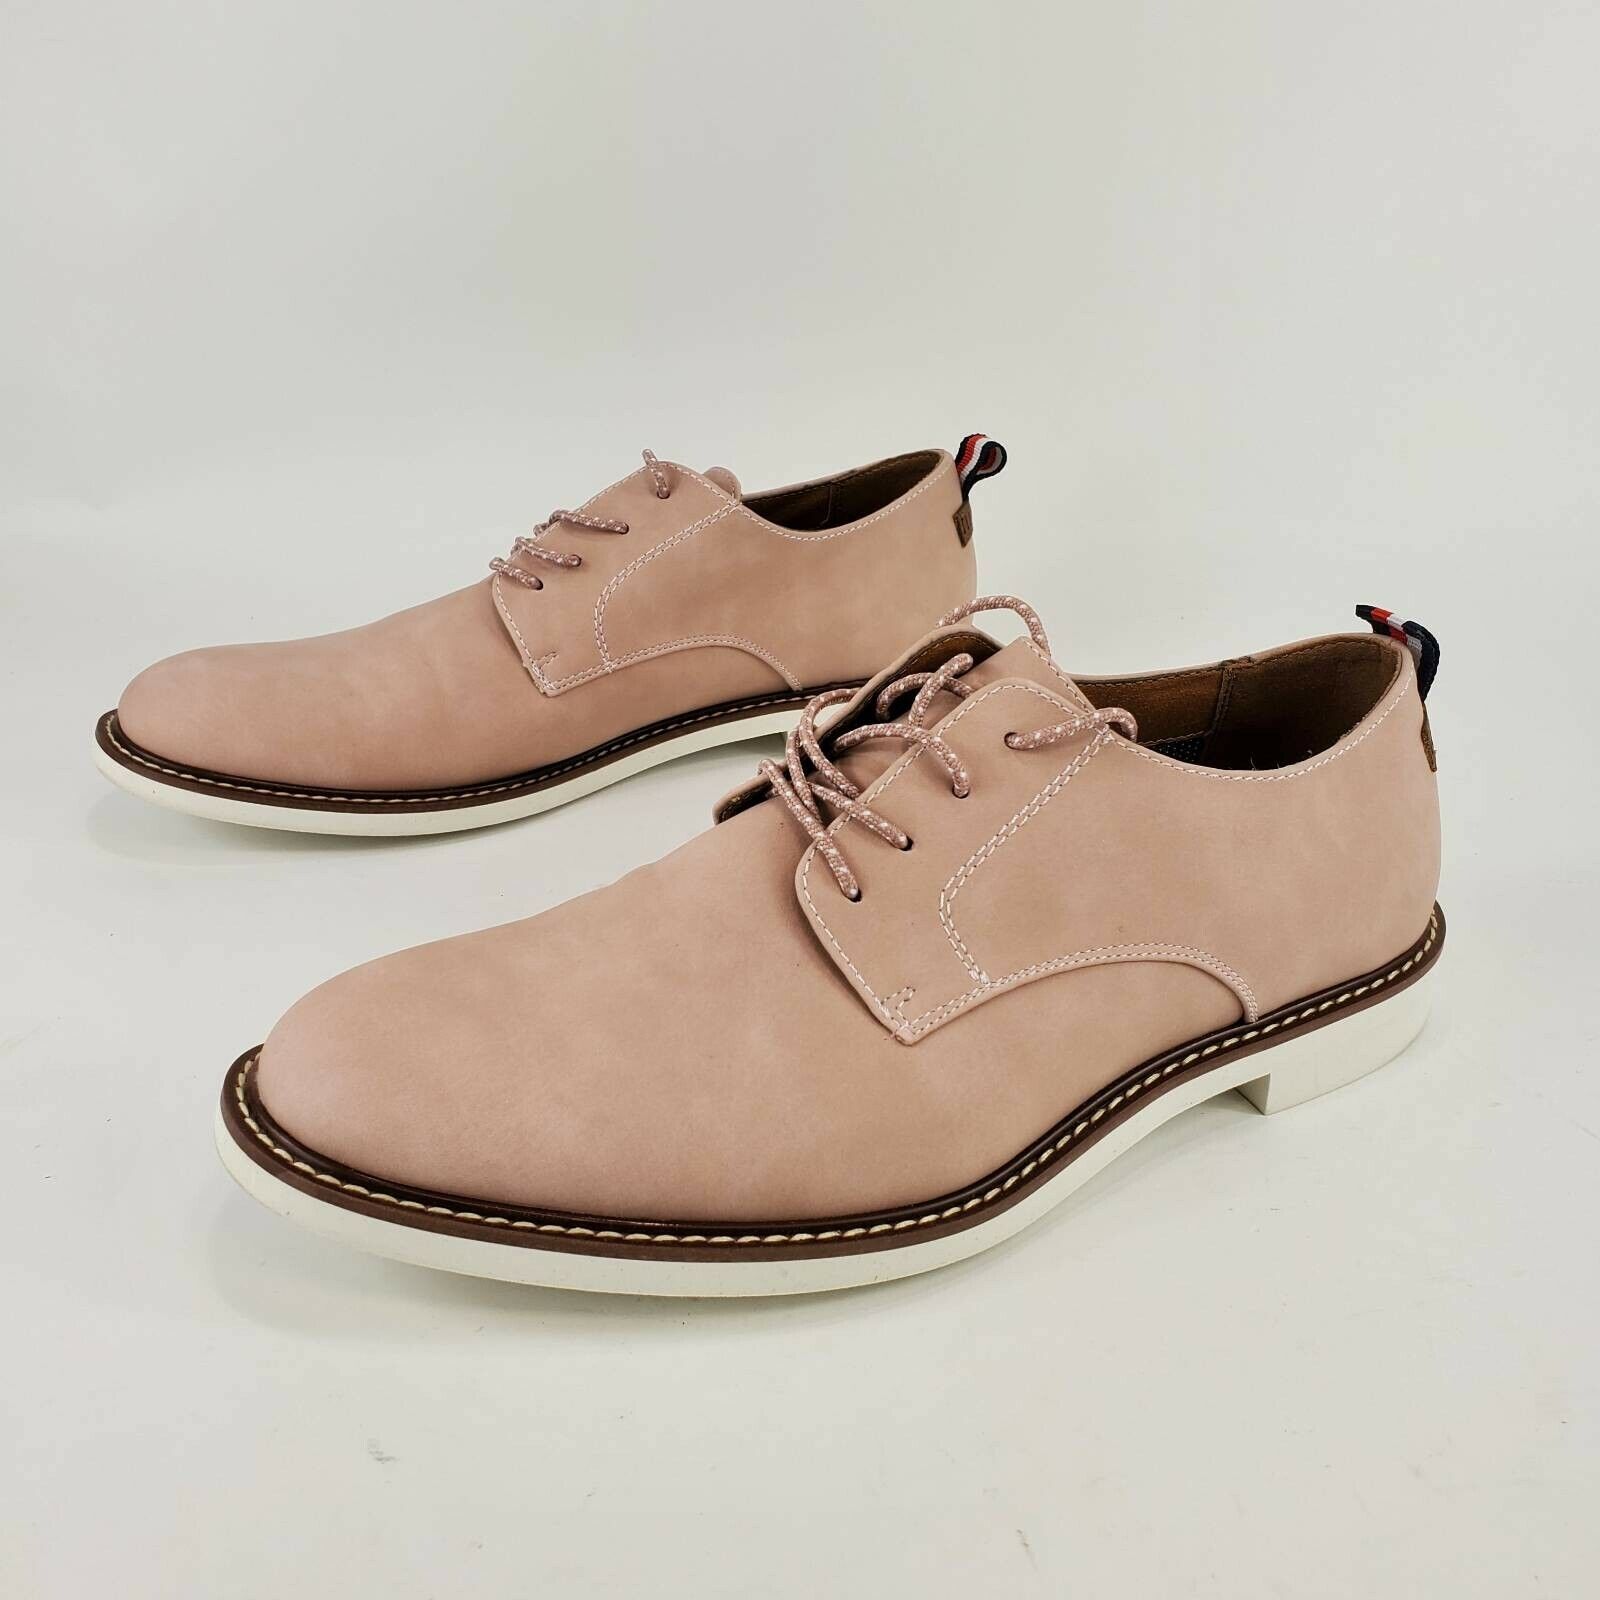 Rechazo Actualizar horario Tommy Hilfiger Mens Garson7 Oxford Shoes Pink Leather Lace Up Almond Toe  9.5 | eBay